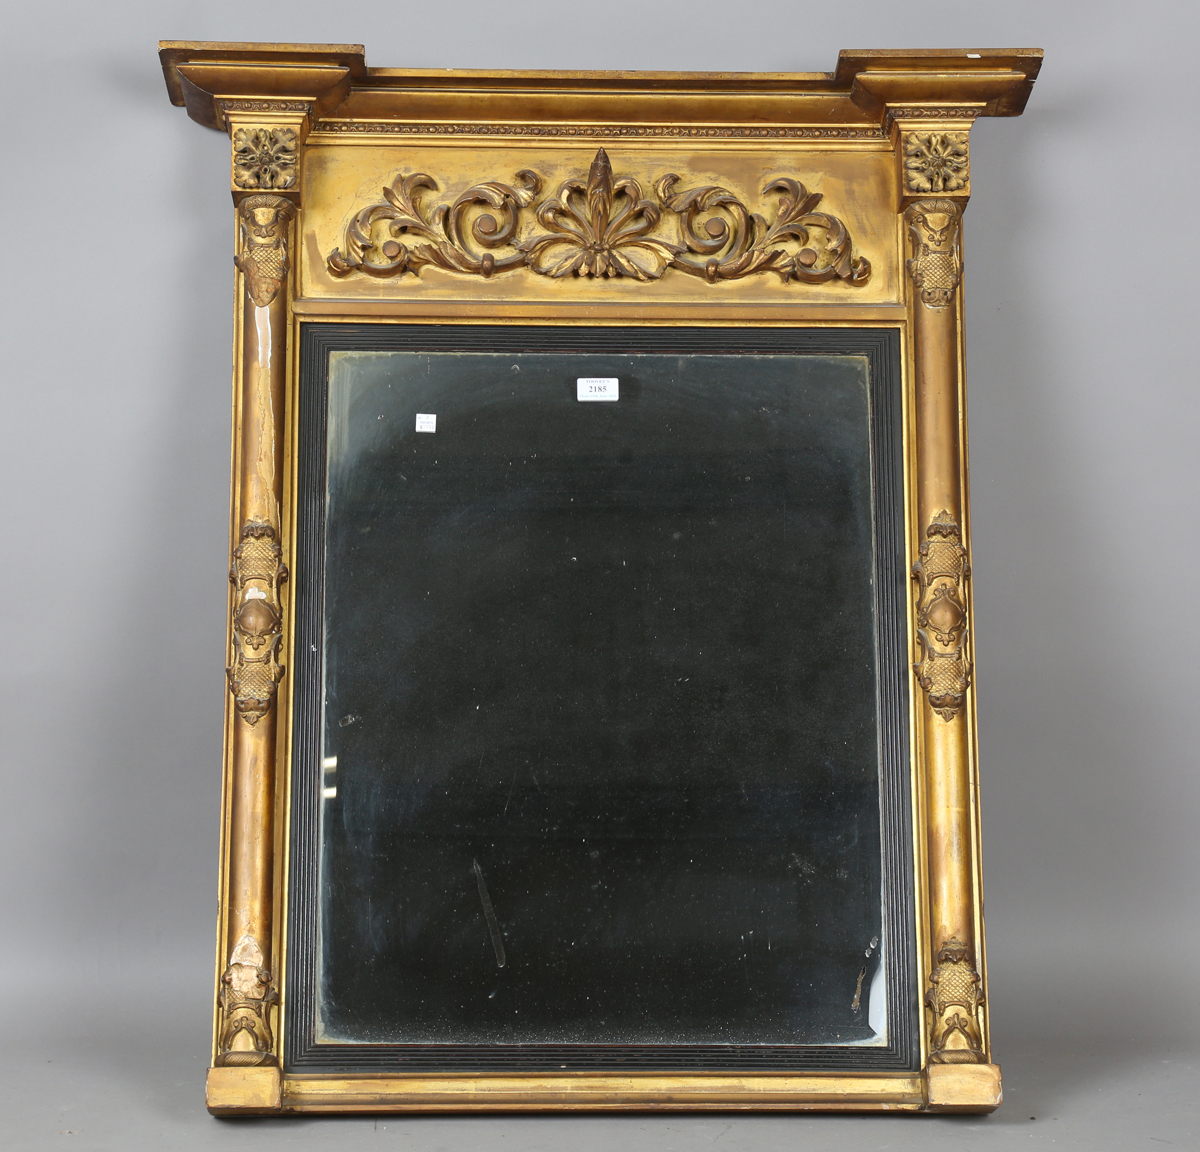 An early 19th century giltwood pier mirror with a carved foliate frieze and foliate cartouche-